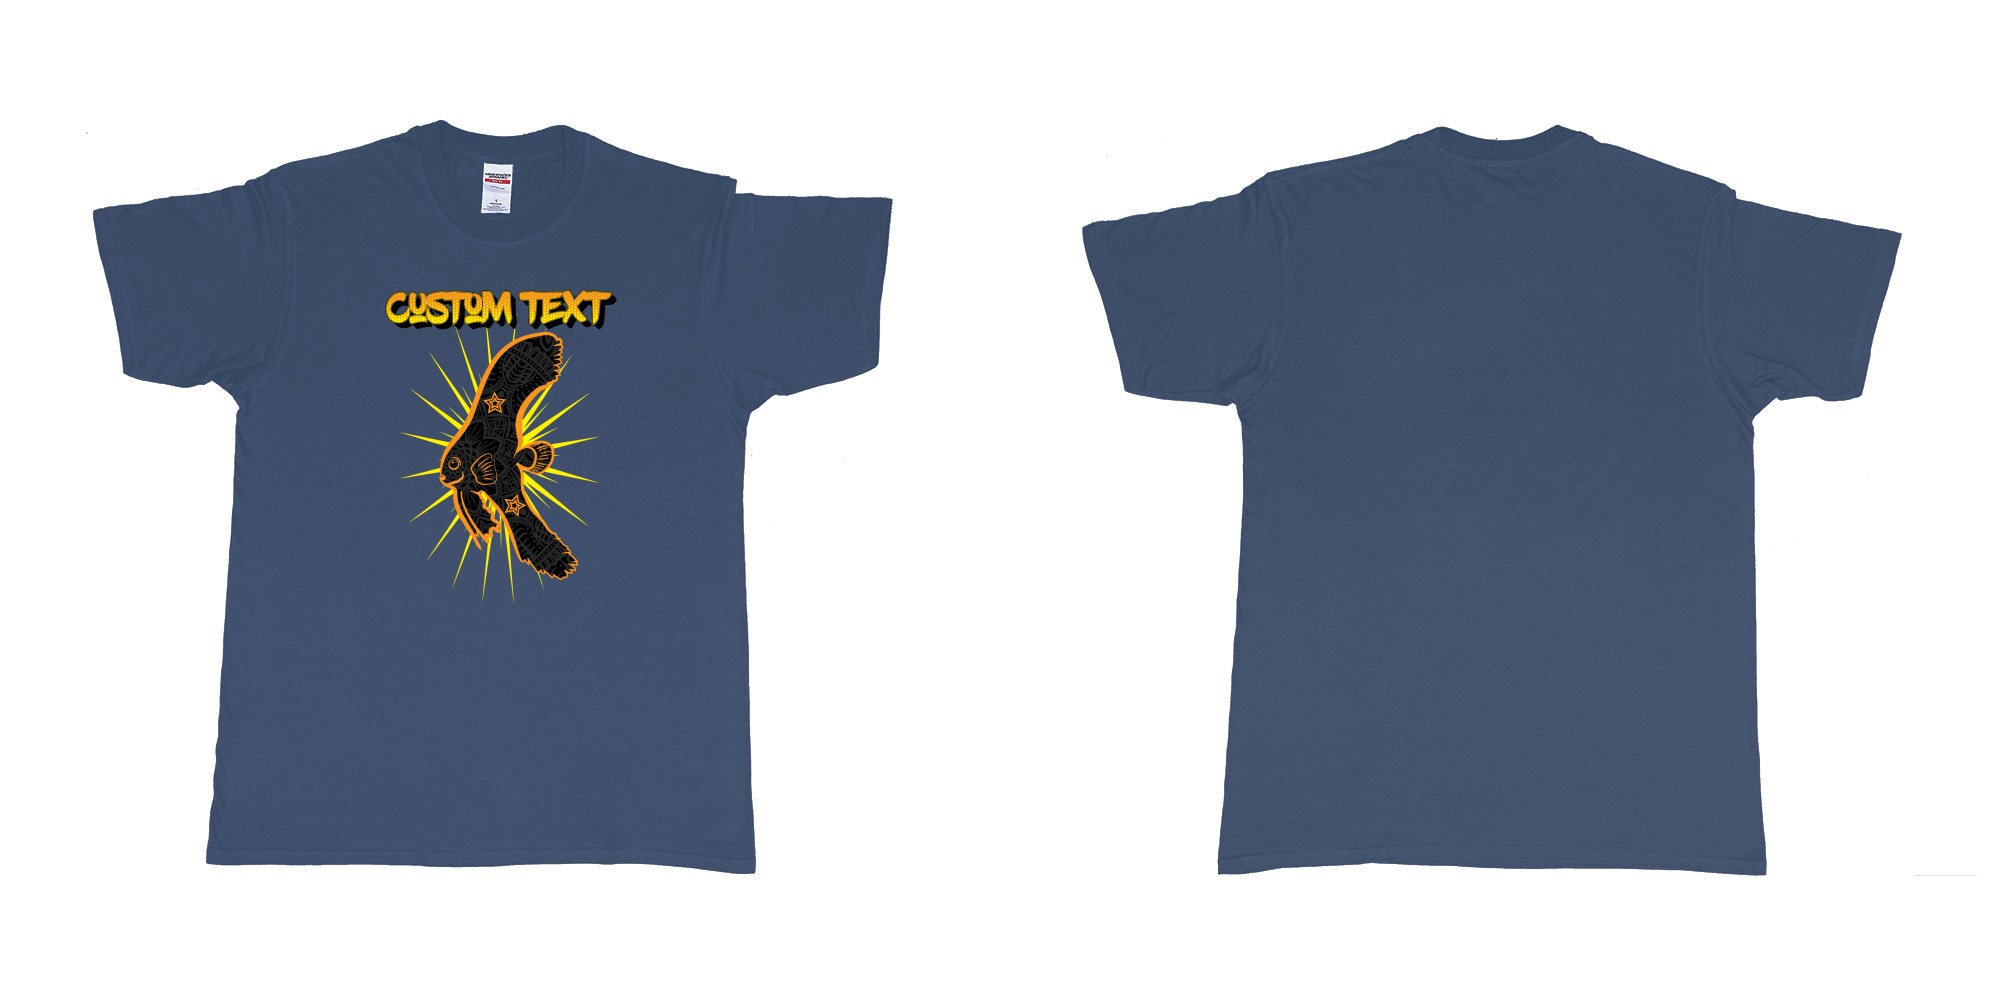 Custom tshirt design batfish juvenile star own text in fabric color navy choice your own text made in Bali by The Pirate Way